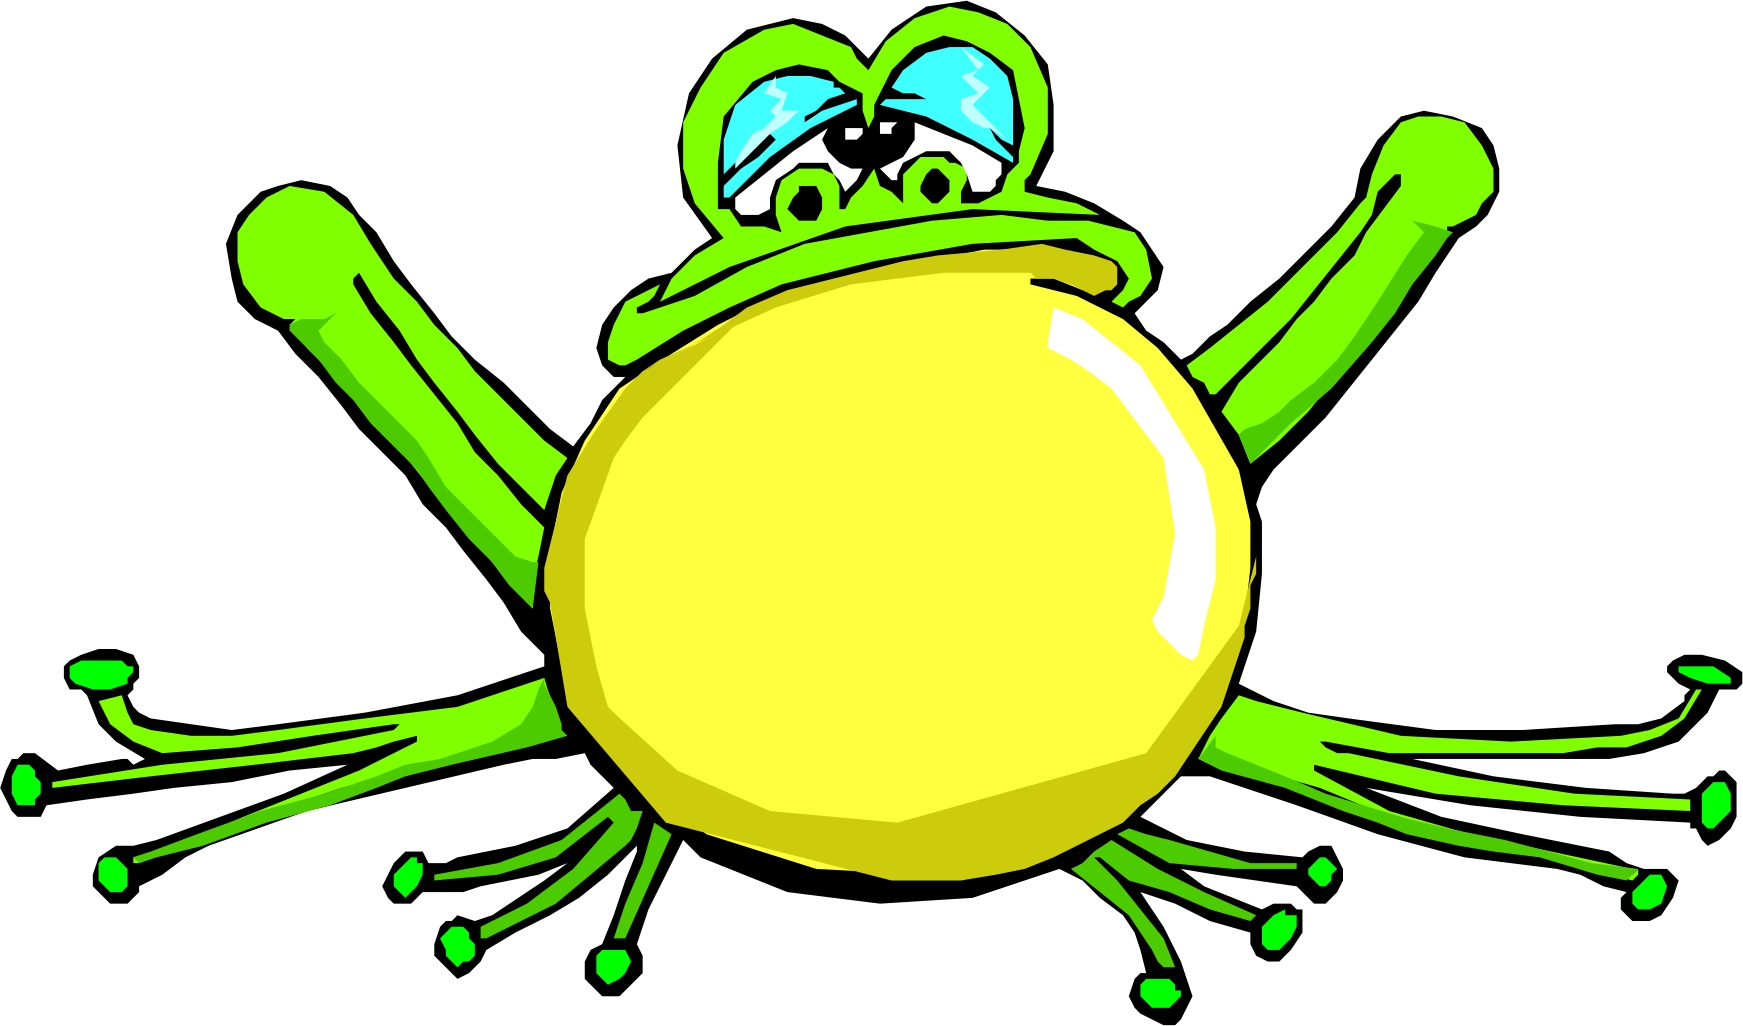 Frog Cartoon Characters - ClipArt Best